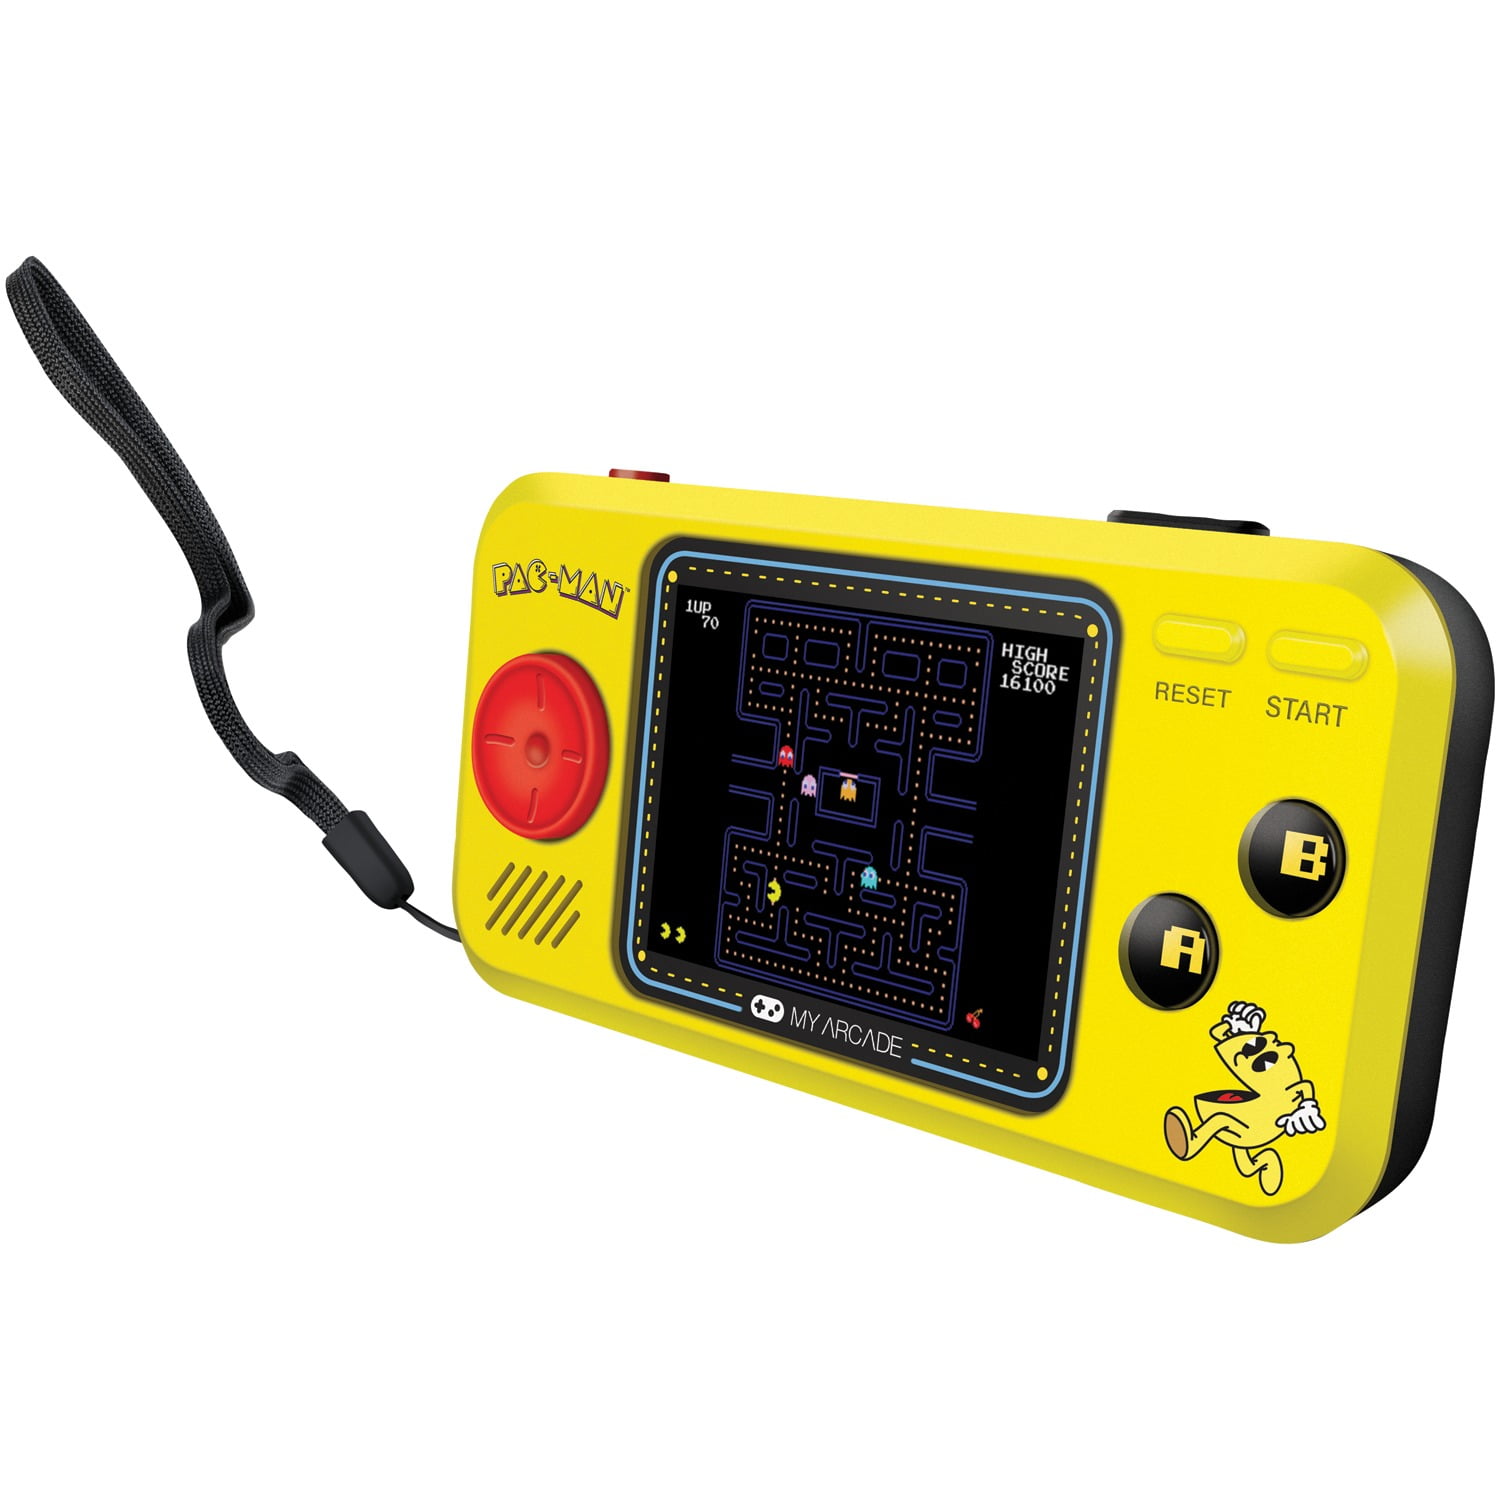 - for sale online Pac-Man Pocket Player Handheld Game Console 3 Built-In Games 0845620032273 MyArcade Pac-Man, Pac-Panic, Pac-Mania DRMDGUNL3227 